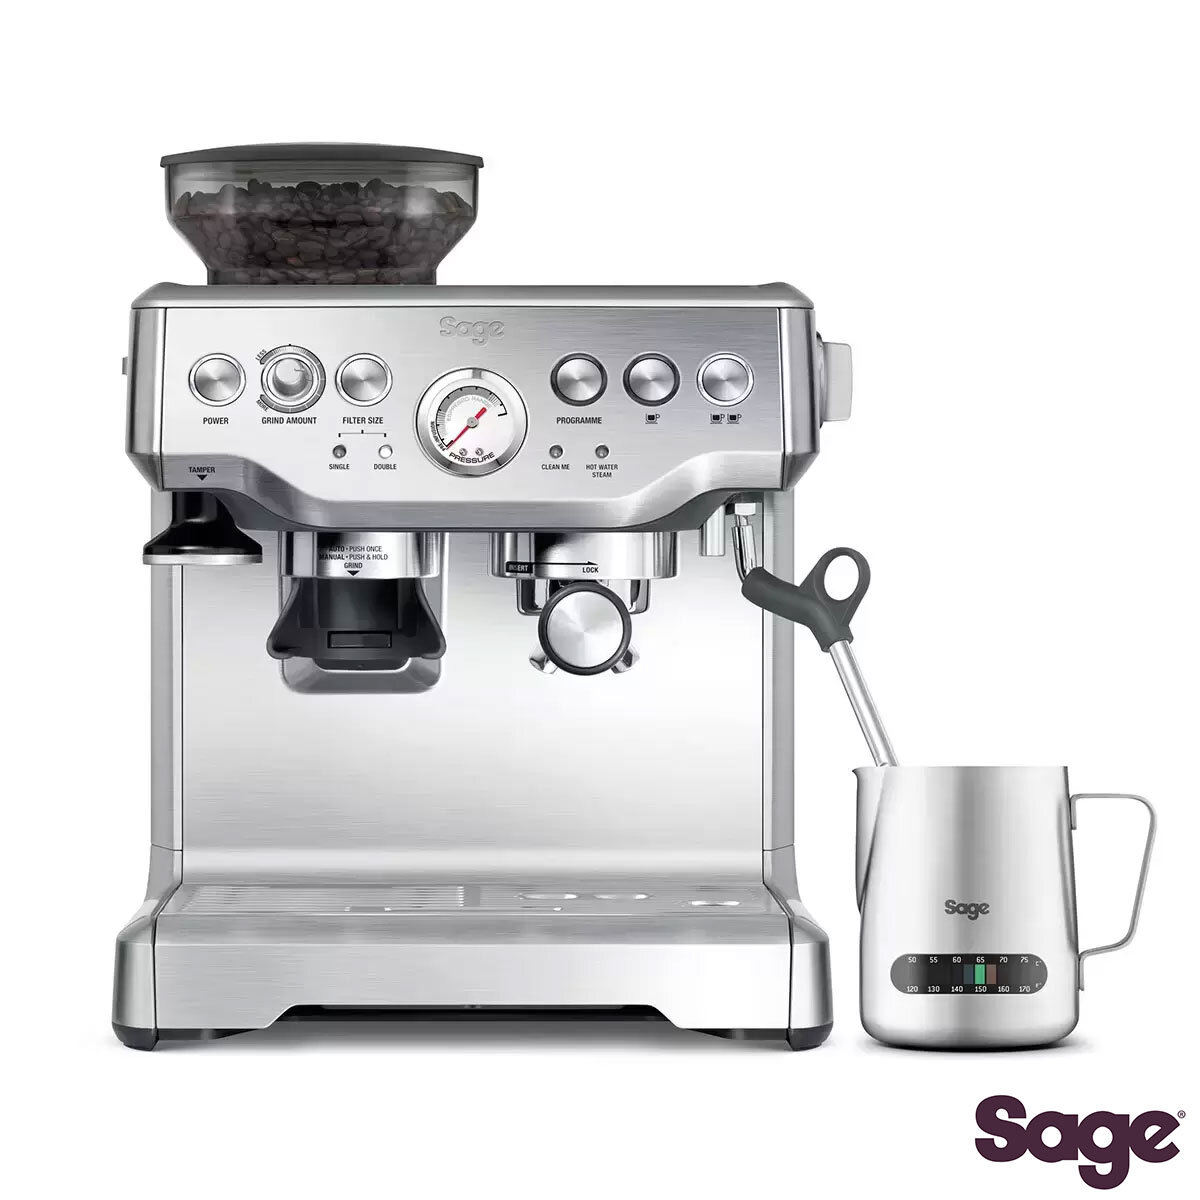 Sage Barista Express Bean to Cup Coffee Machine in Brushed Stainless Steel, BES875UK